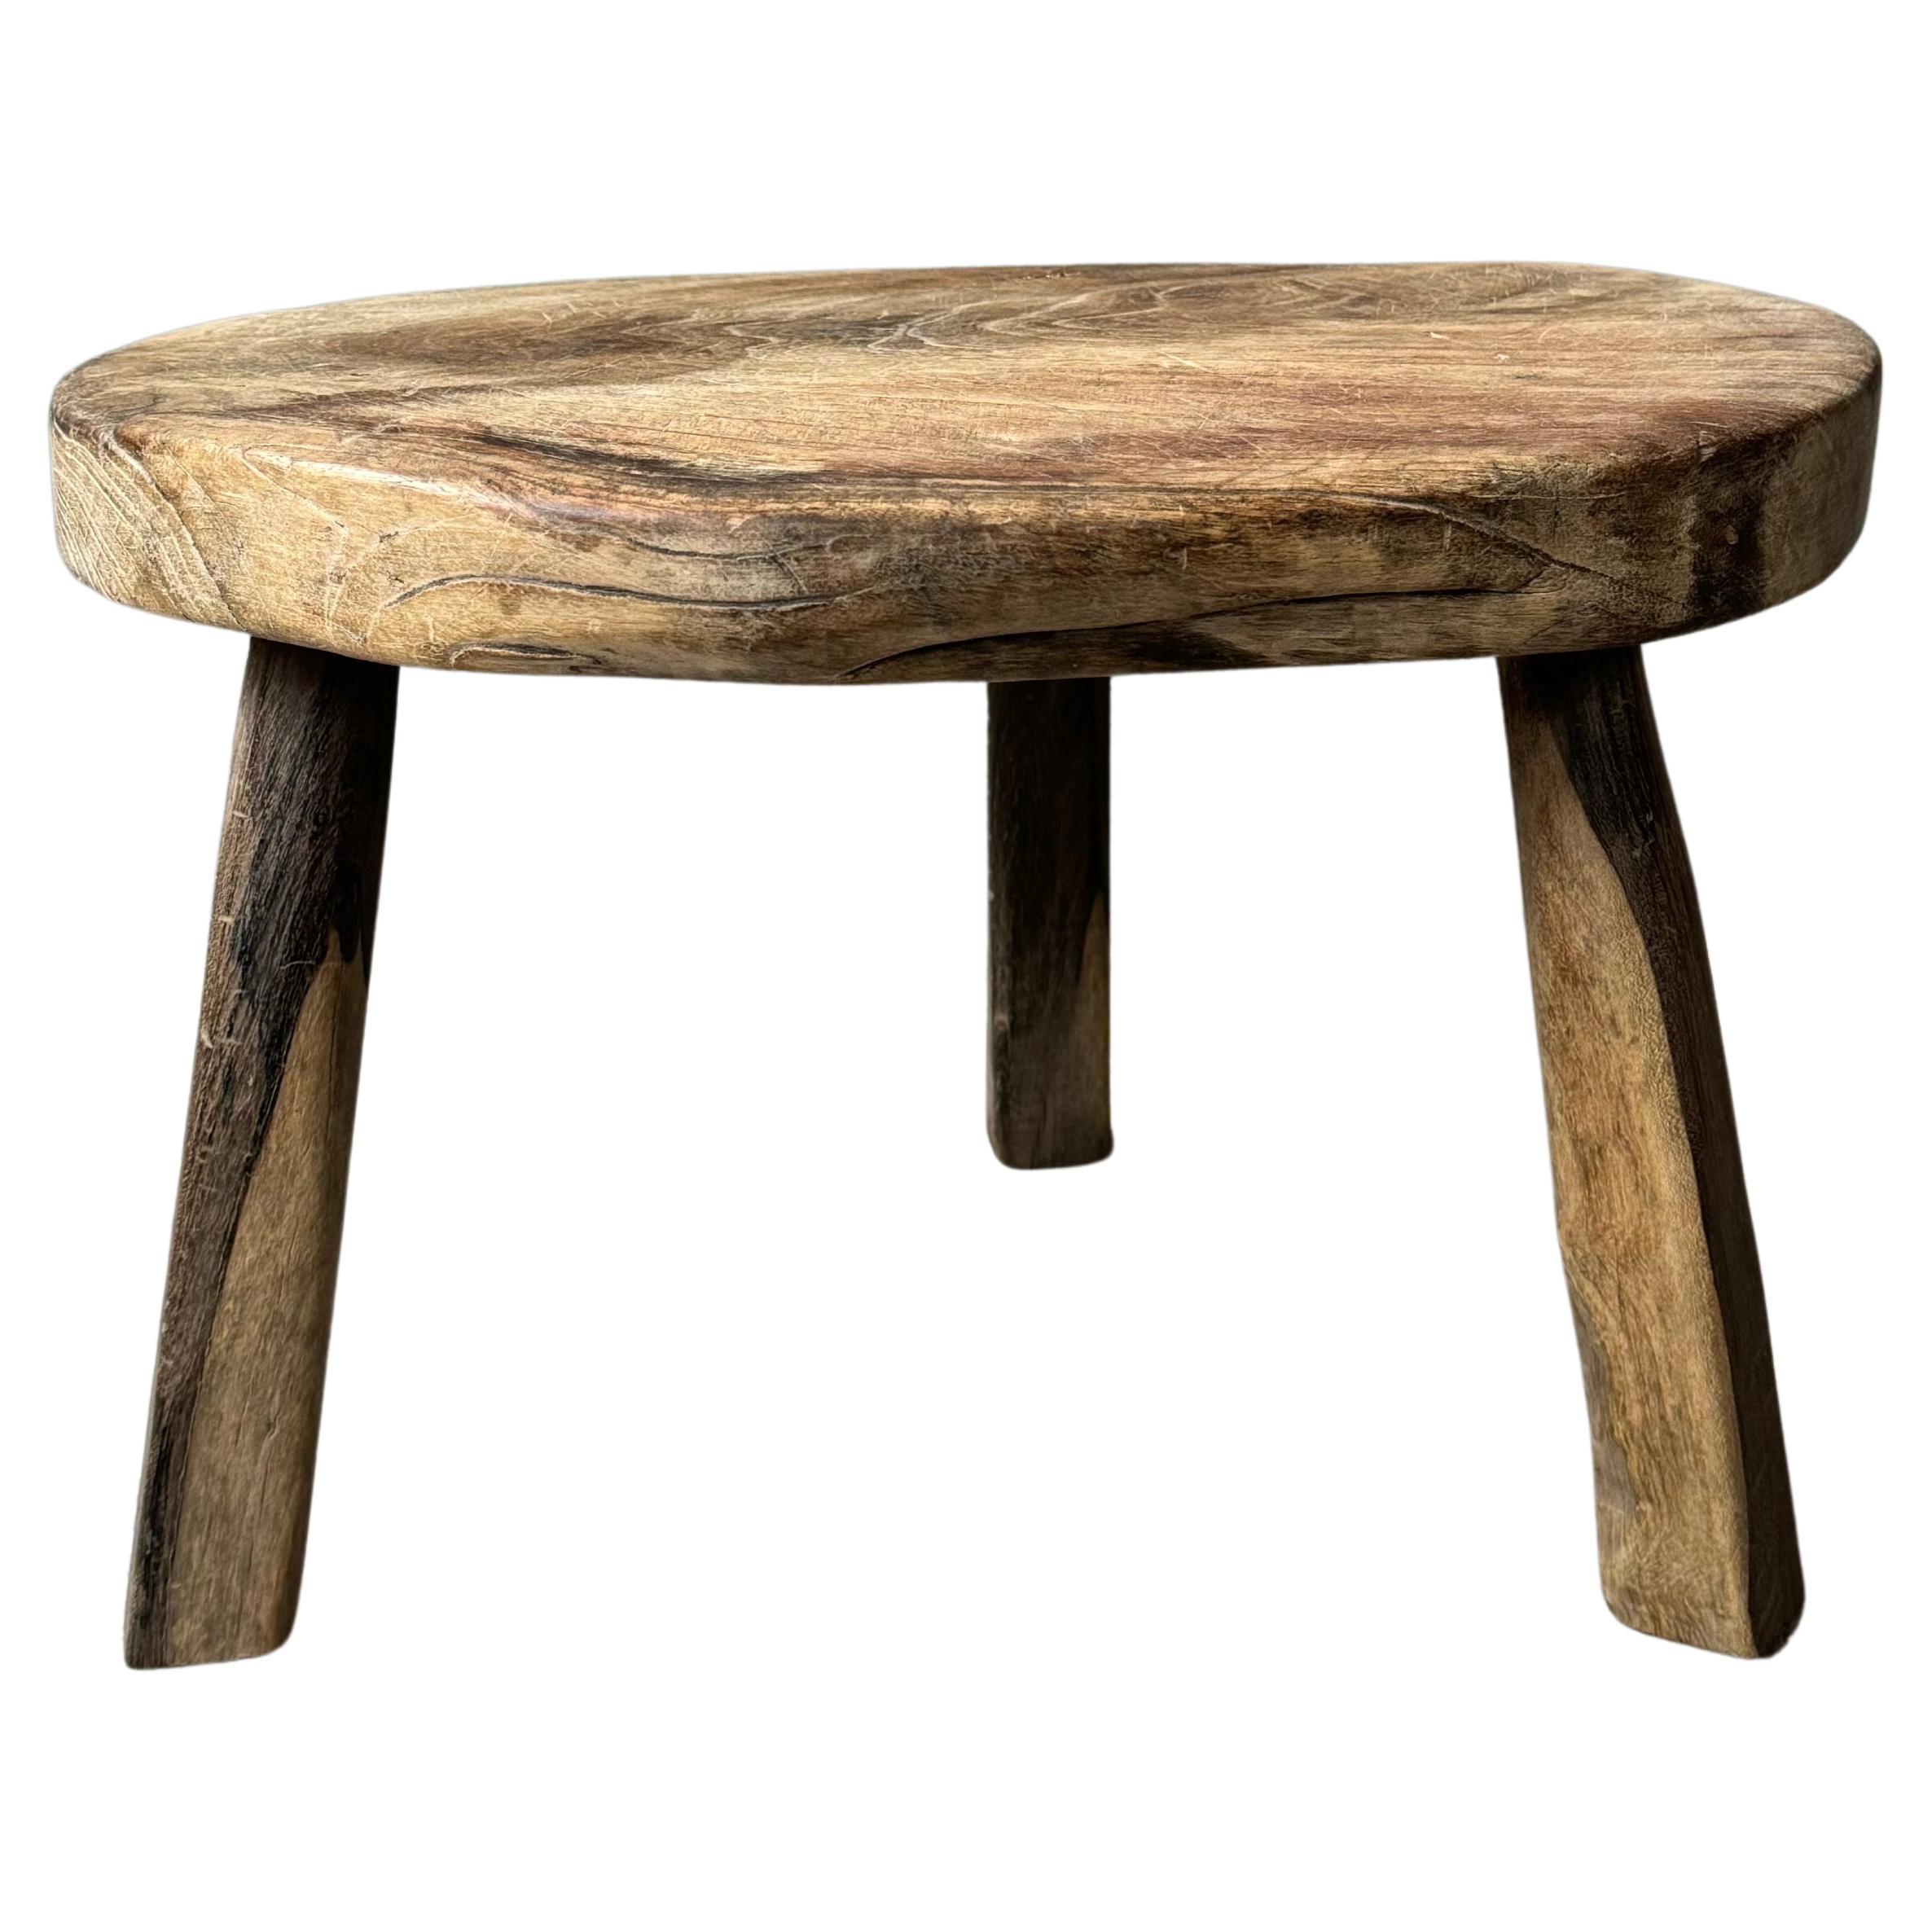 Primitive Hardwood Round Table From Central Yucatan, Mexico, Late 20th Century For Sale